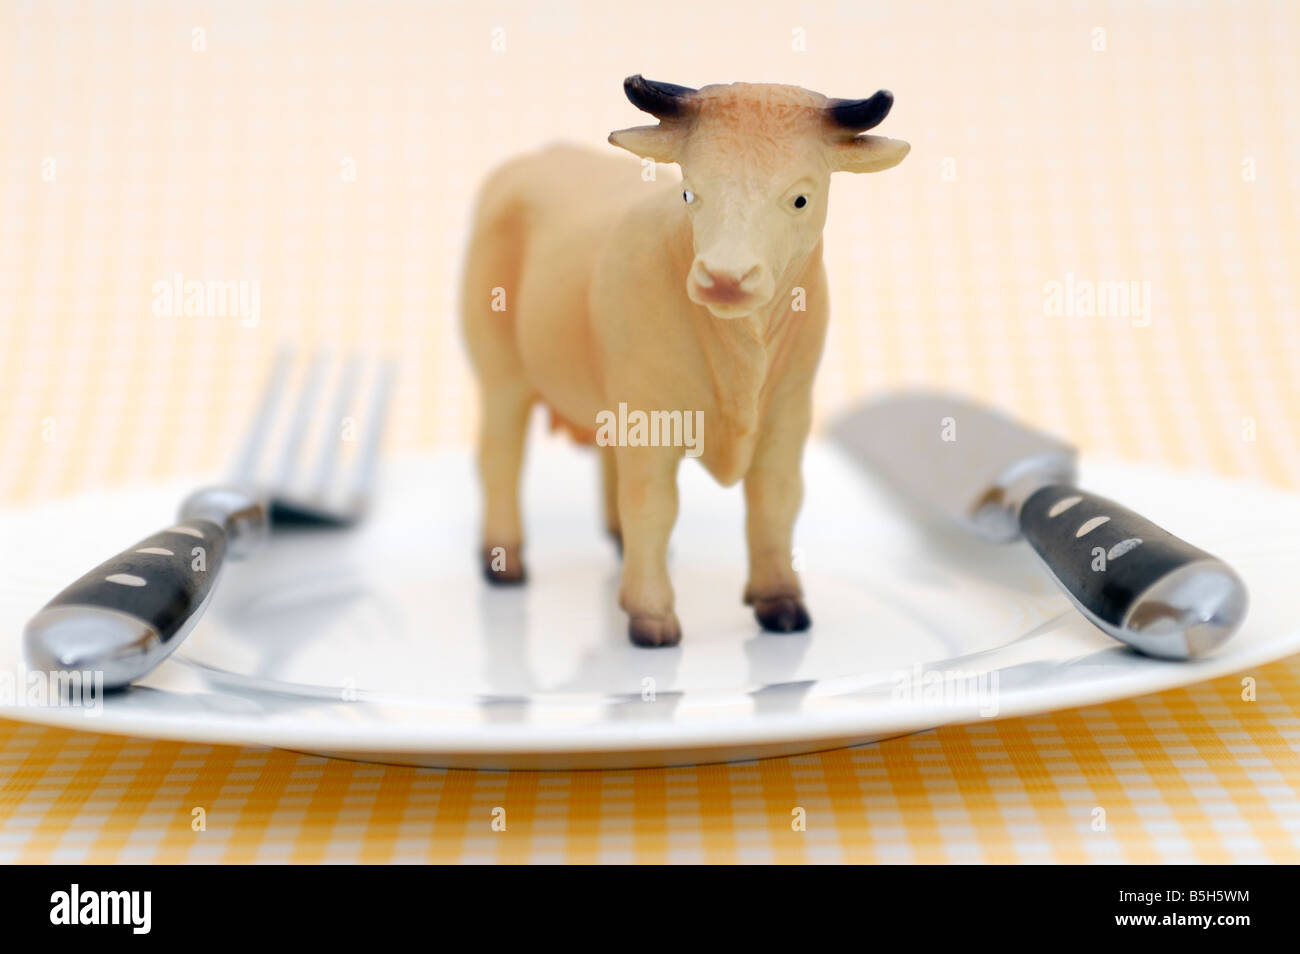 toy cow upon a plate, symbol for vegetarian food Stock Photo